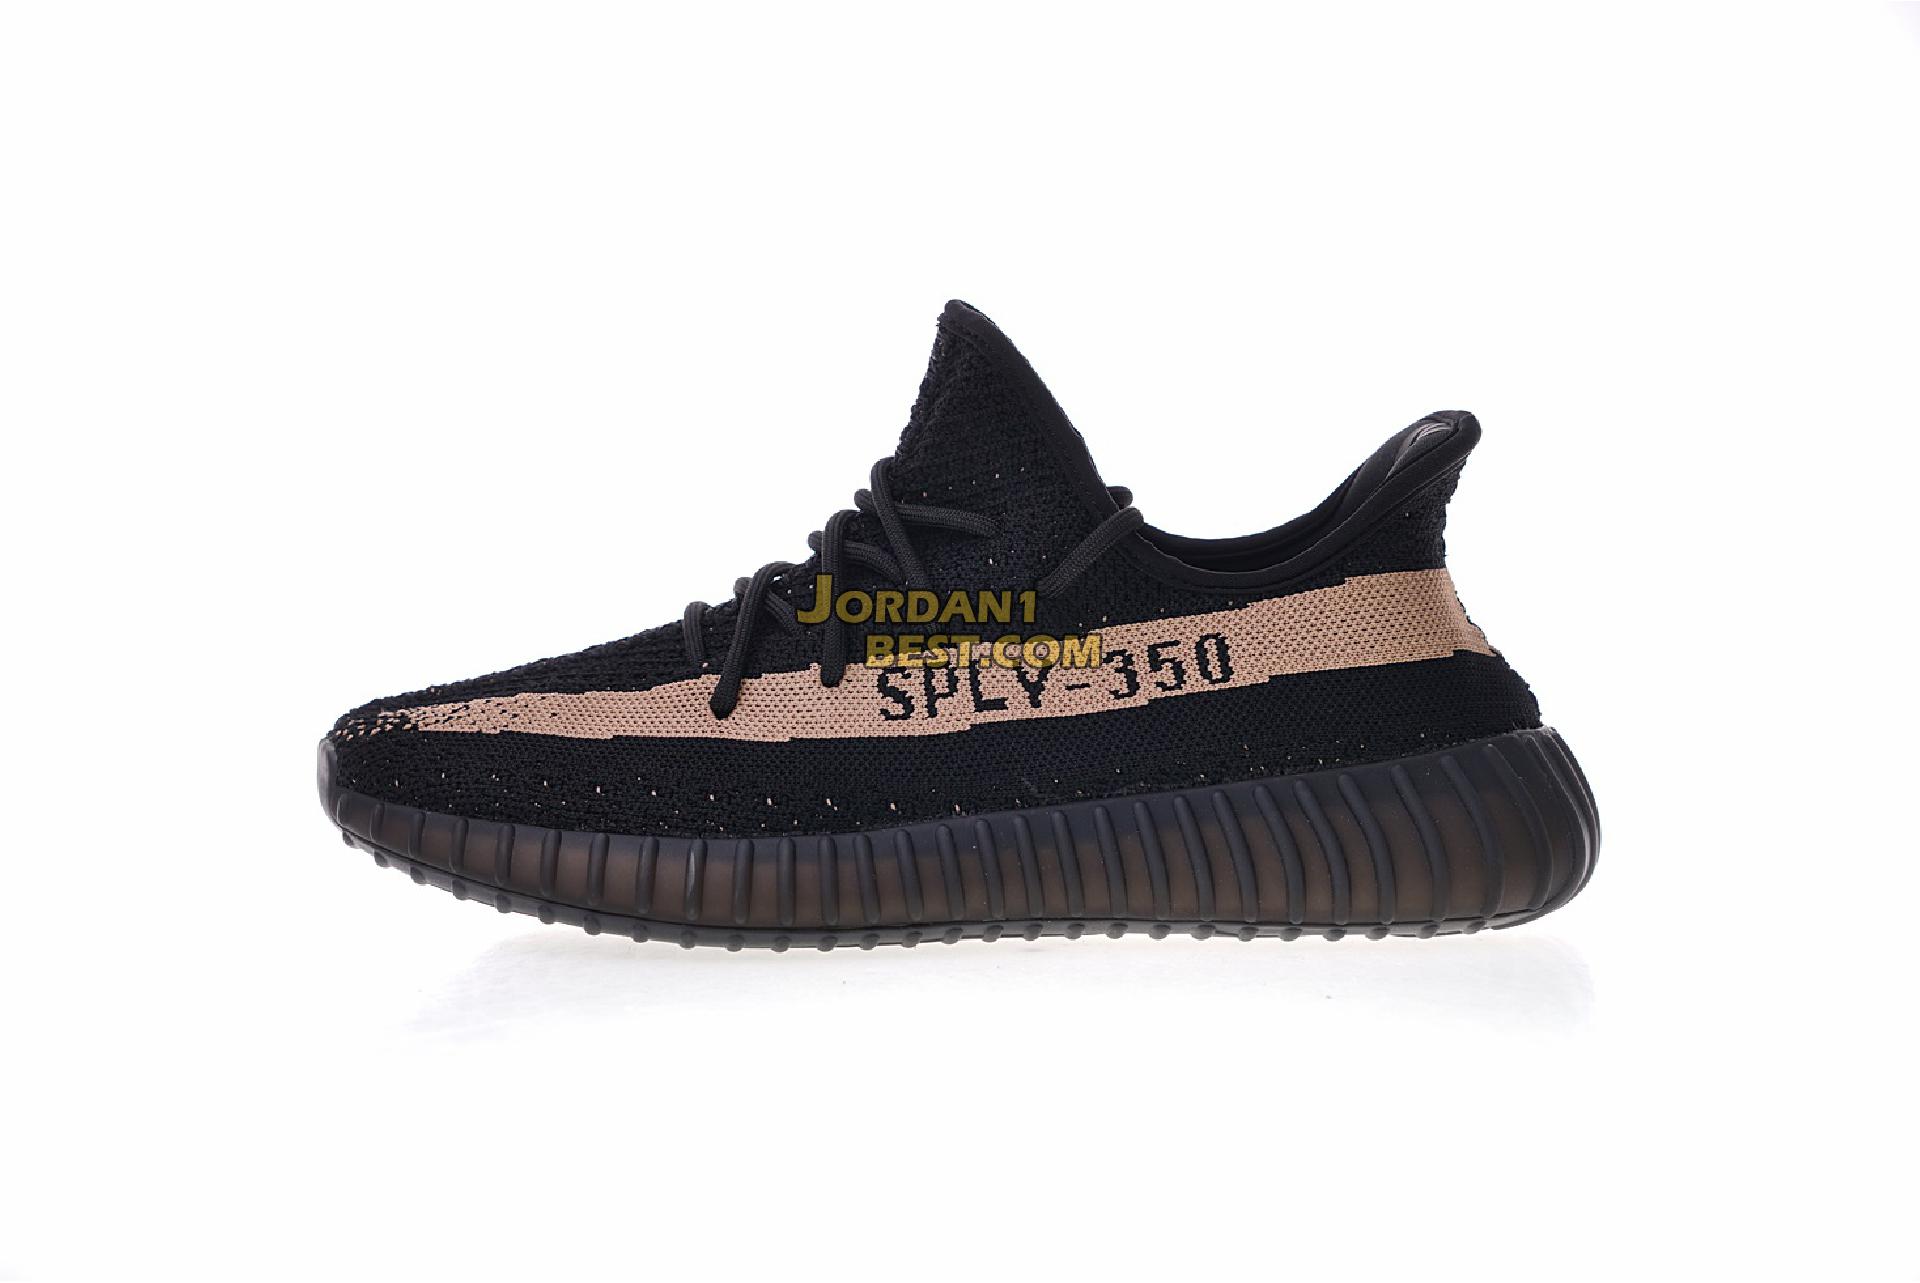 Adidas Yeezy Boost 350 V2 "Copper" BY1605